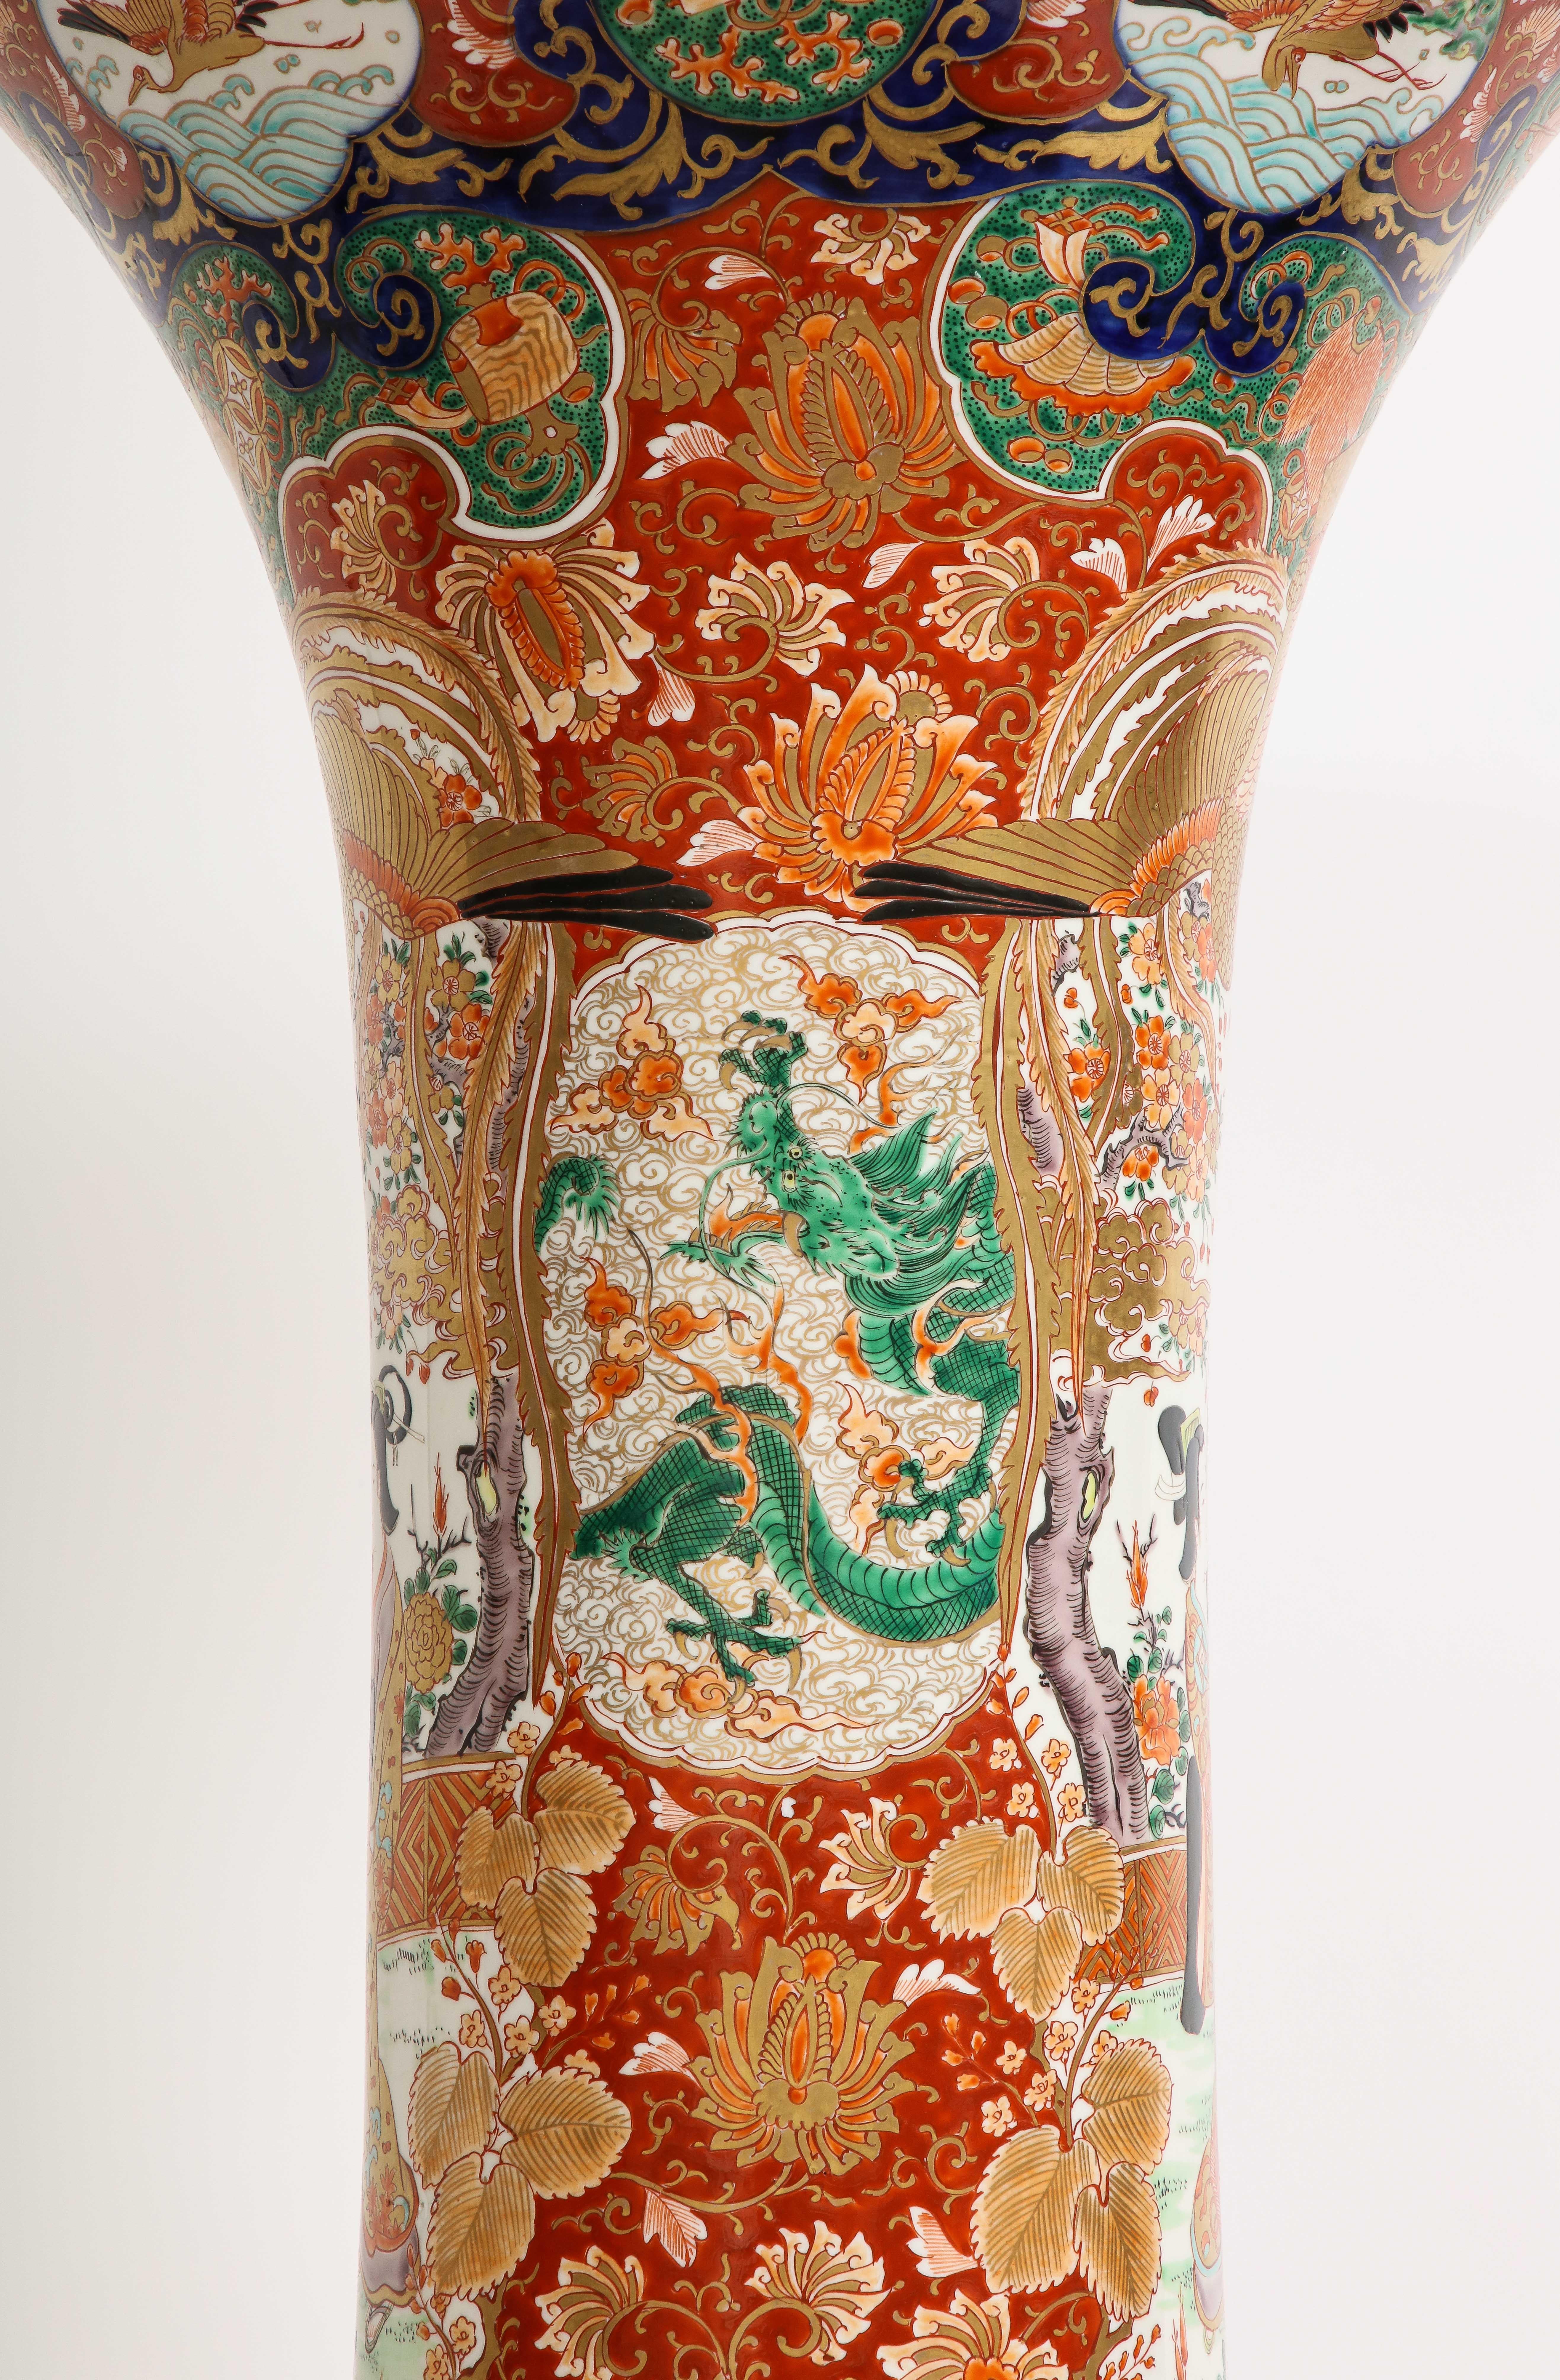  Palace Size Meiji Period Japanese Kutani Porcelain Vase, 1880 In Good Condition For Sale In New York, NY